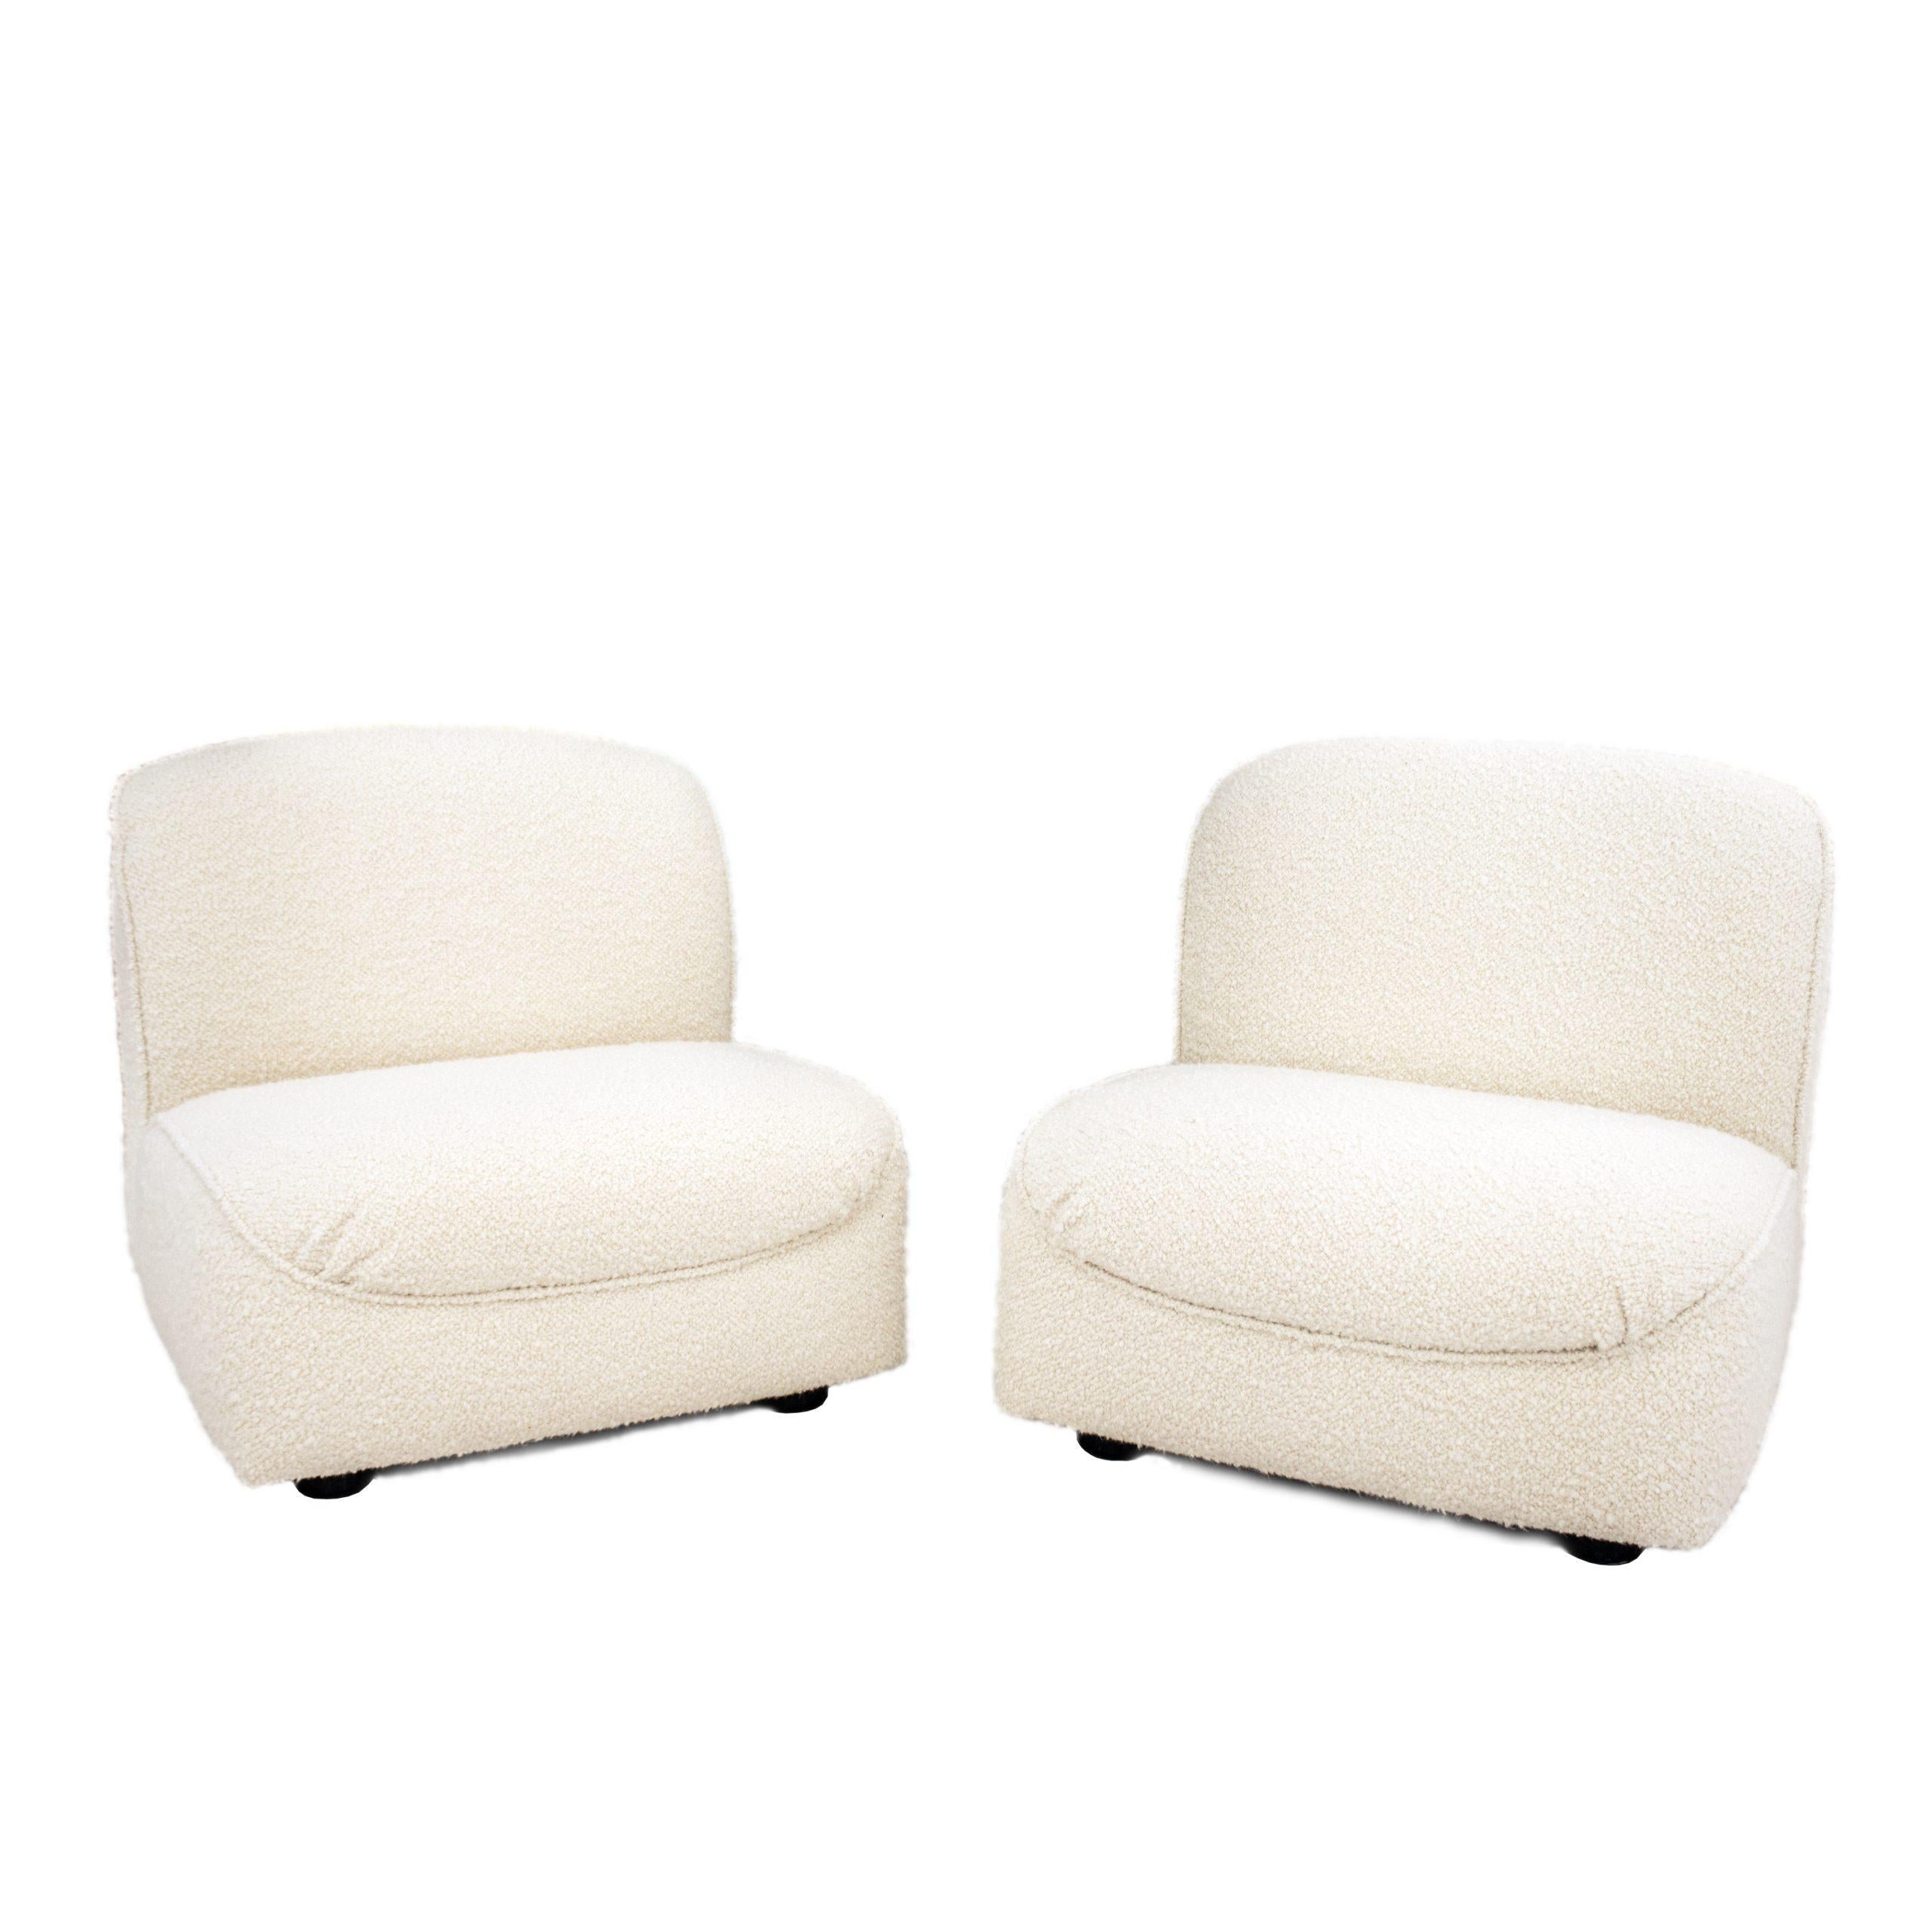 Mid-20th Century Modular Armchair Deigned by Afra e Tobia Scarpa for Cassina, Italy, 1968 For Sale